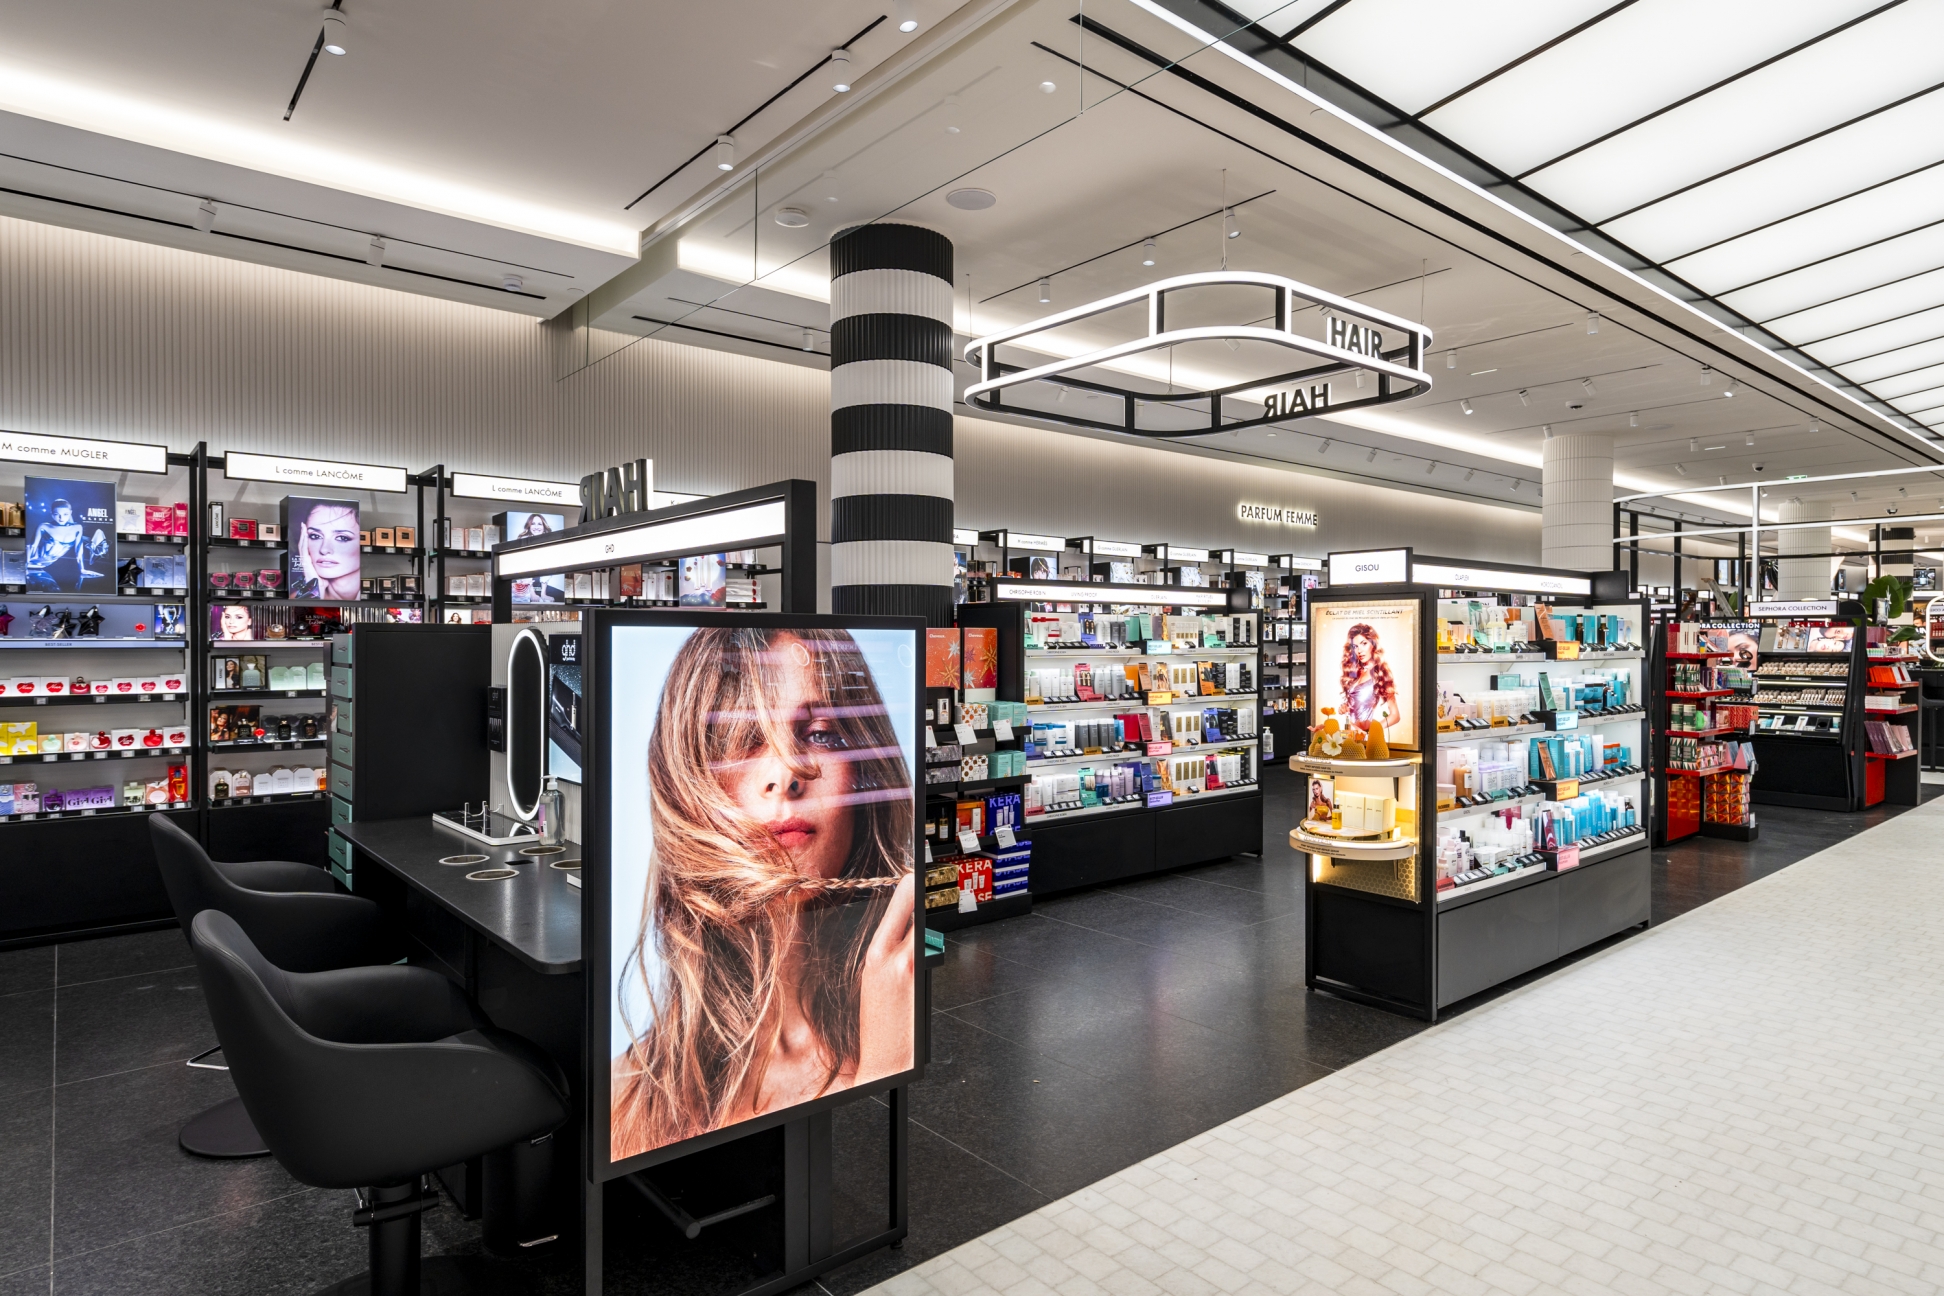 Selective Retailing - Sephora, DFS, customer relations, high-end